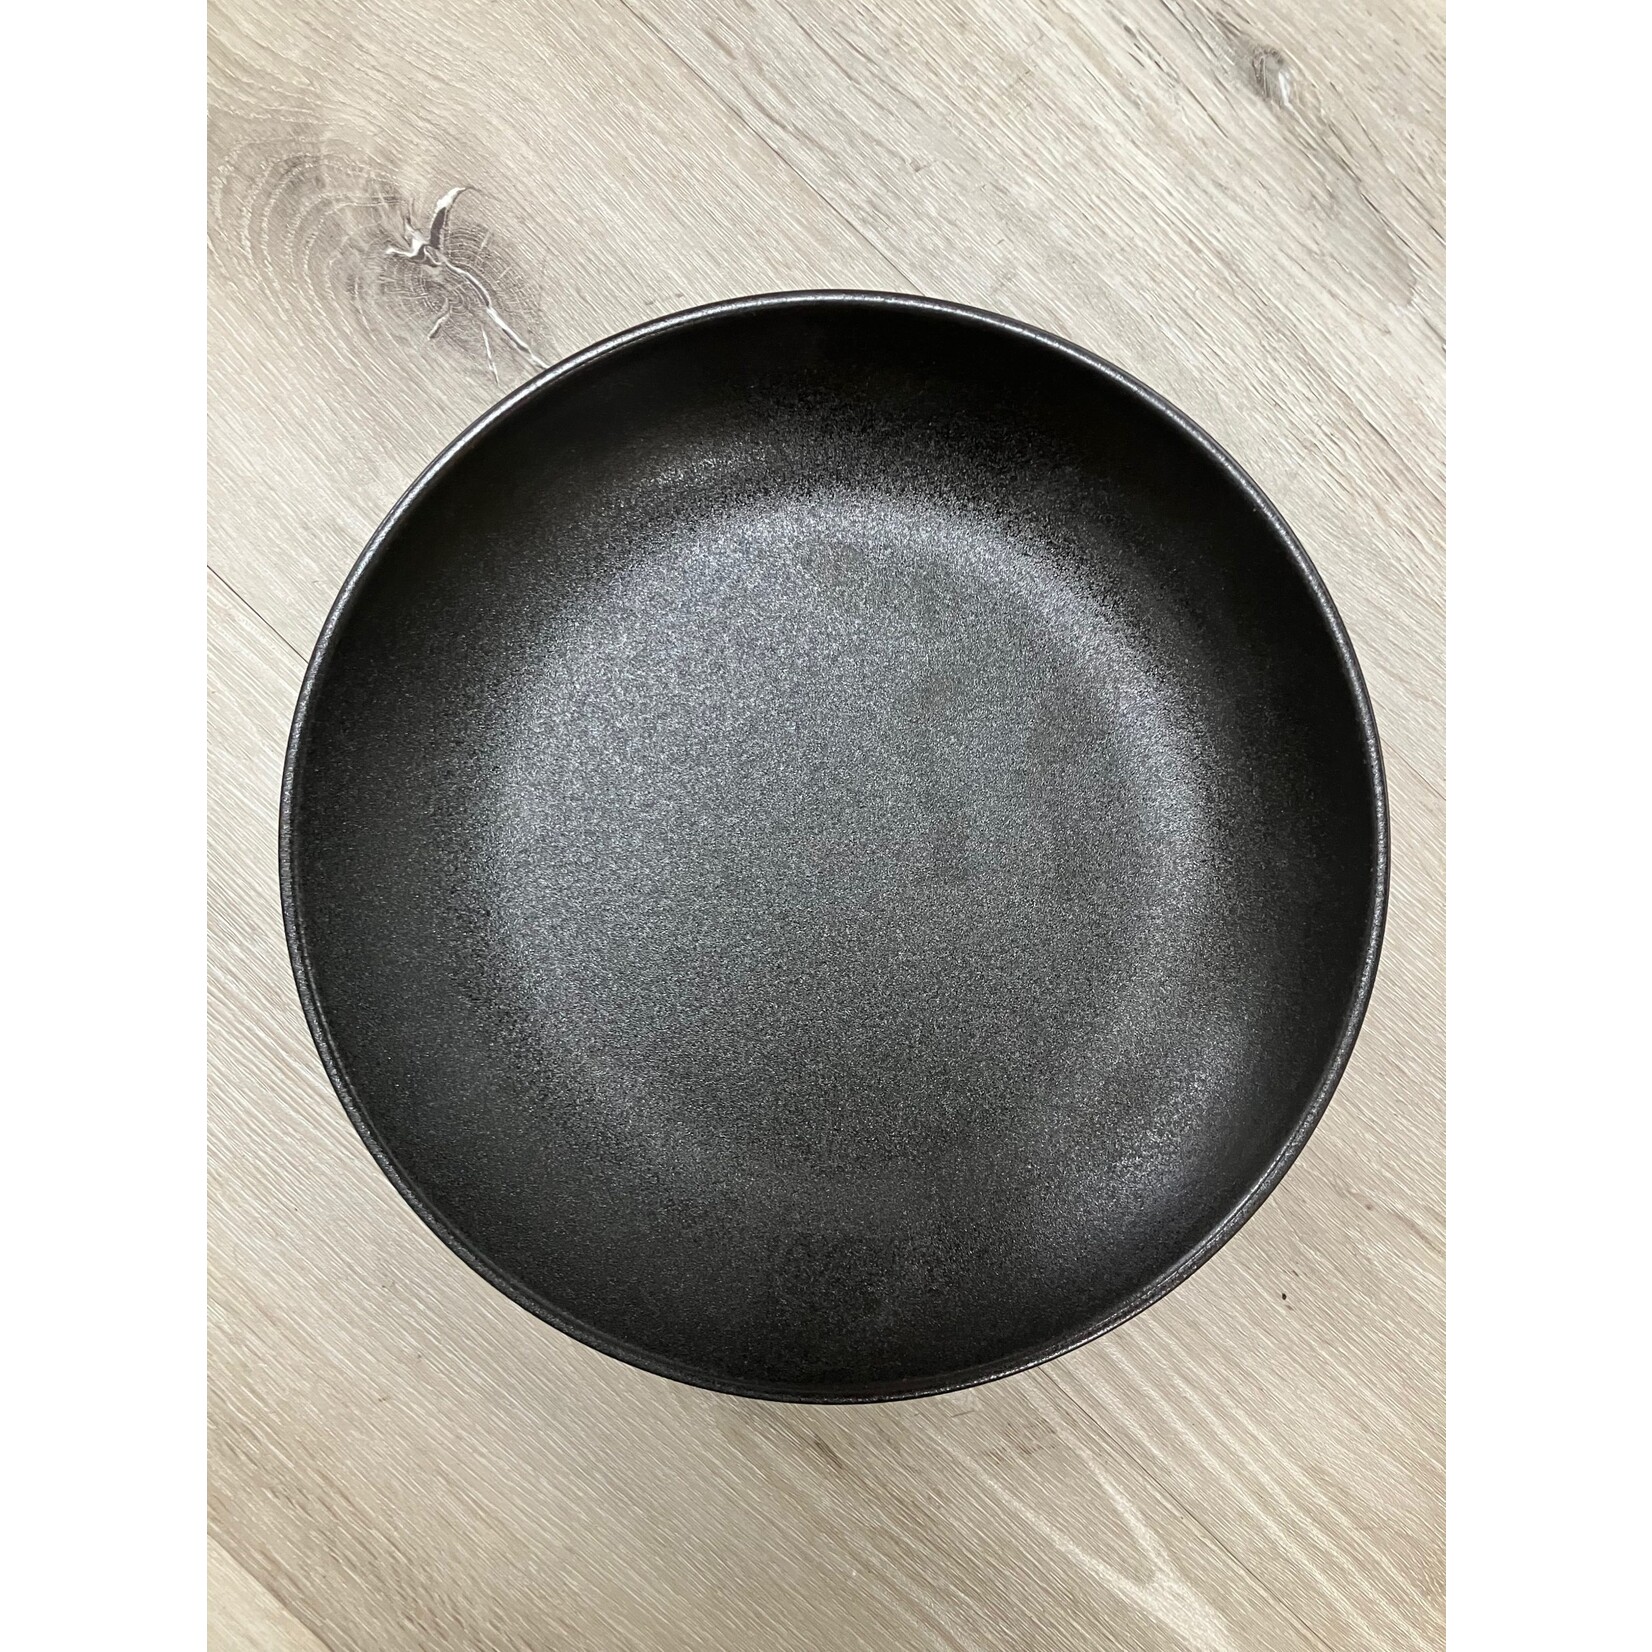 Palate and Plate BK-0608 10" round deep coupe black plate 35 oz   12/case